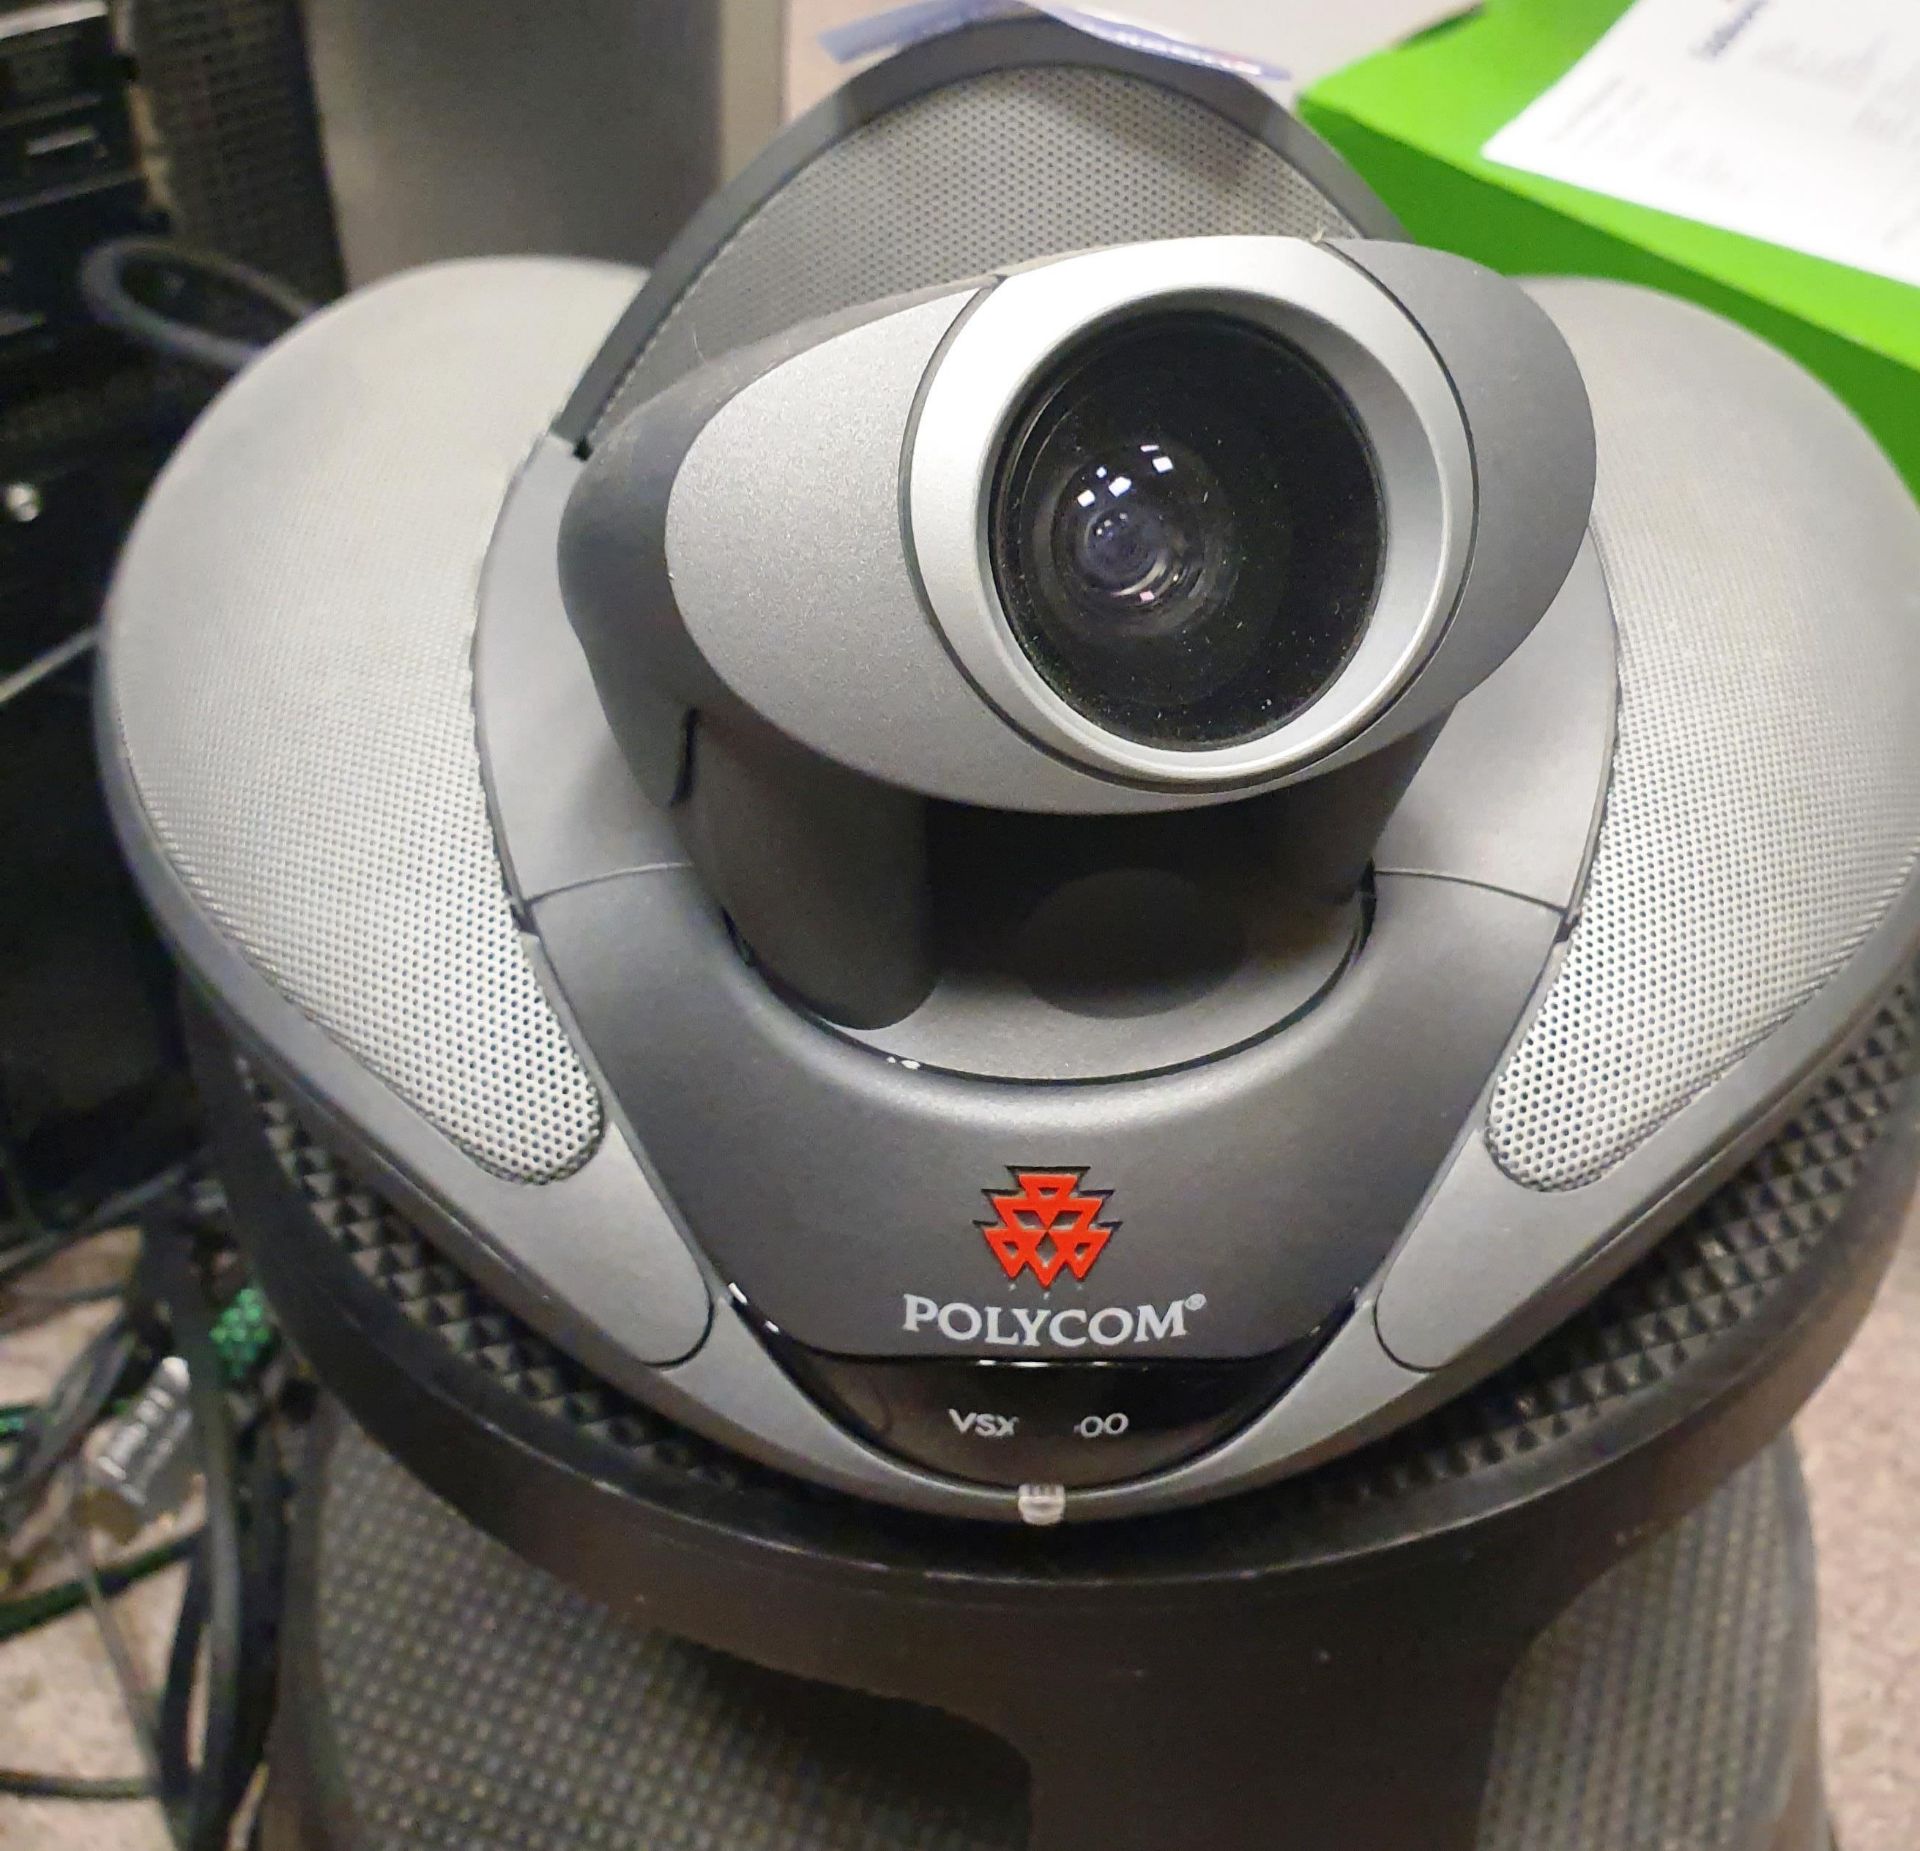 Polycom VSX 7000 Video Conferencing System - Image 3 of 4